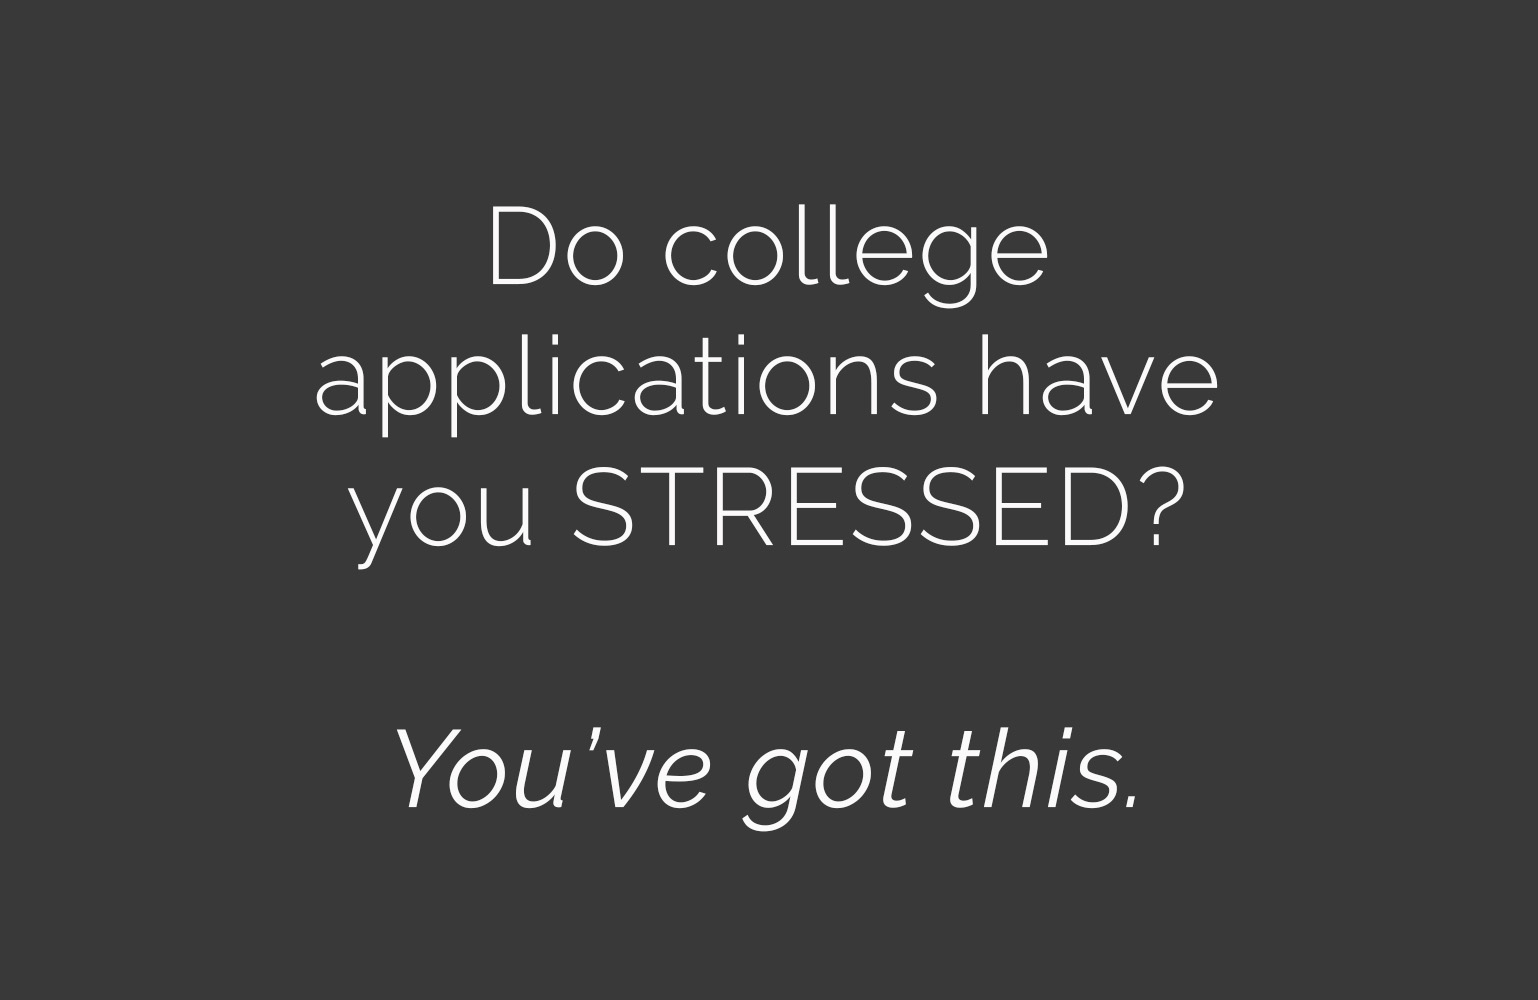 Do college applications have you stressed? You've got this.